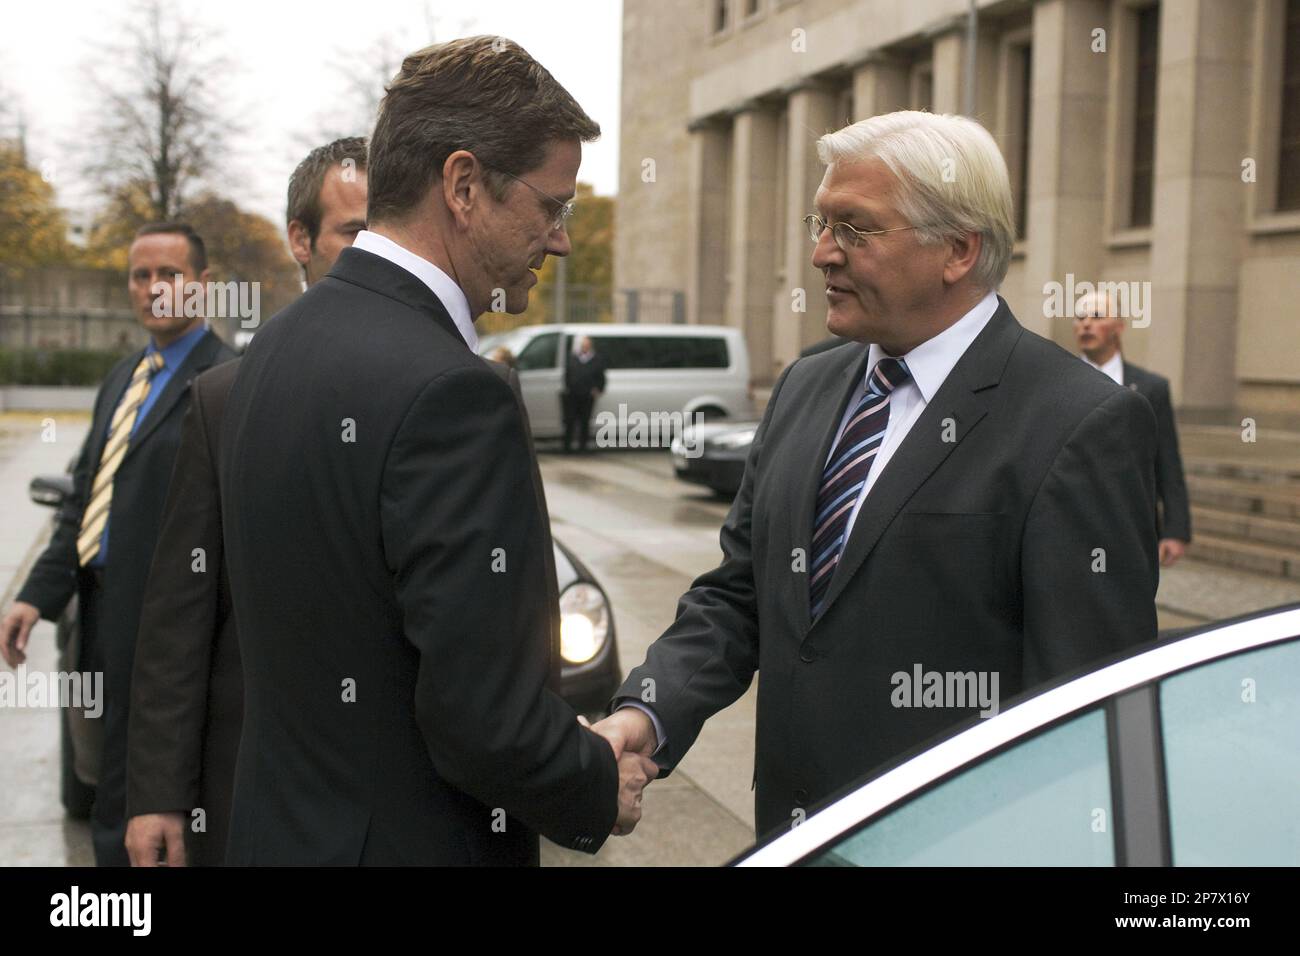 Germany's new Foreign Minister Guido Westerwelle, left, bids farewell to his predecessor Frank-Walter Steinmeier, right, after a ceremony to hand-over the office at the Foreign Ministry in Berlin, Germany, Thursday, Oct. 29, 2009. The leader of Germany's pro-business Free Democrats party has taken over as the new foreign minister a month after general elections. (AP Photo/Arno Burgi, Pool) Foto Stock